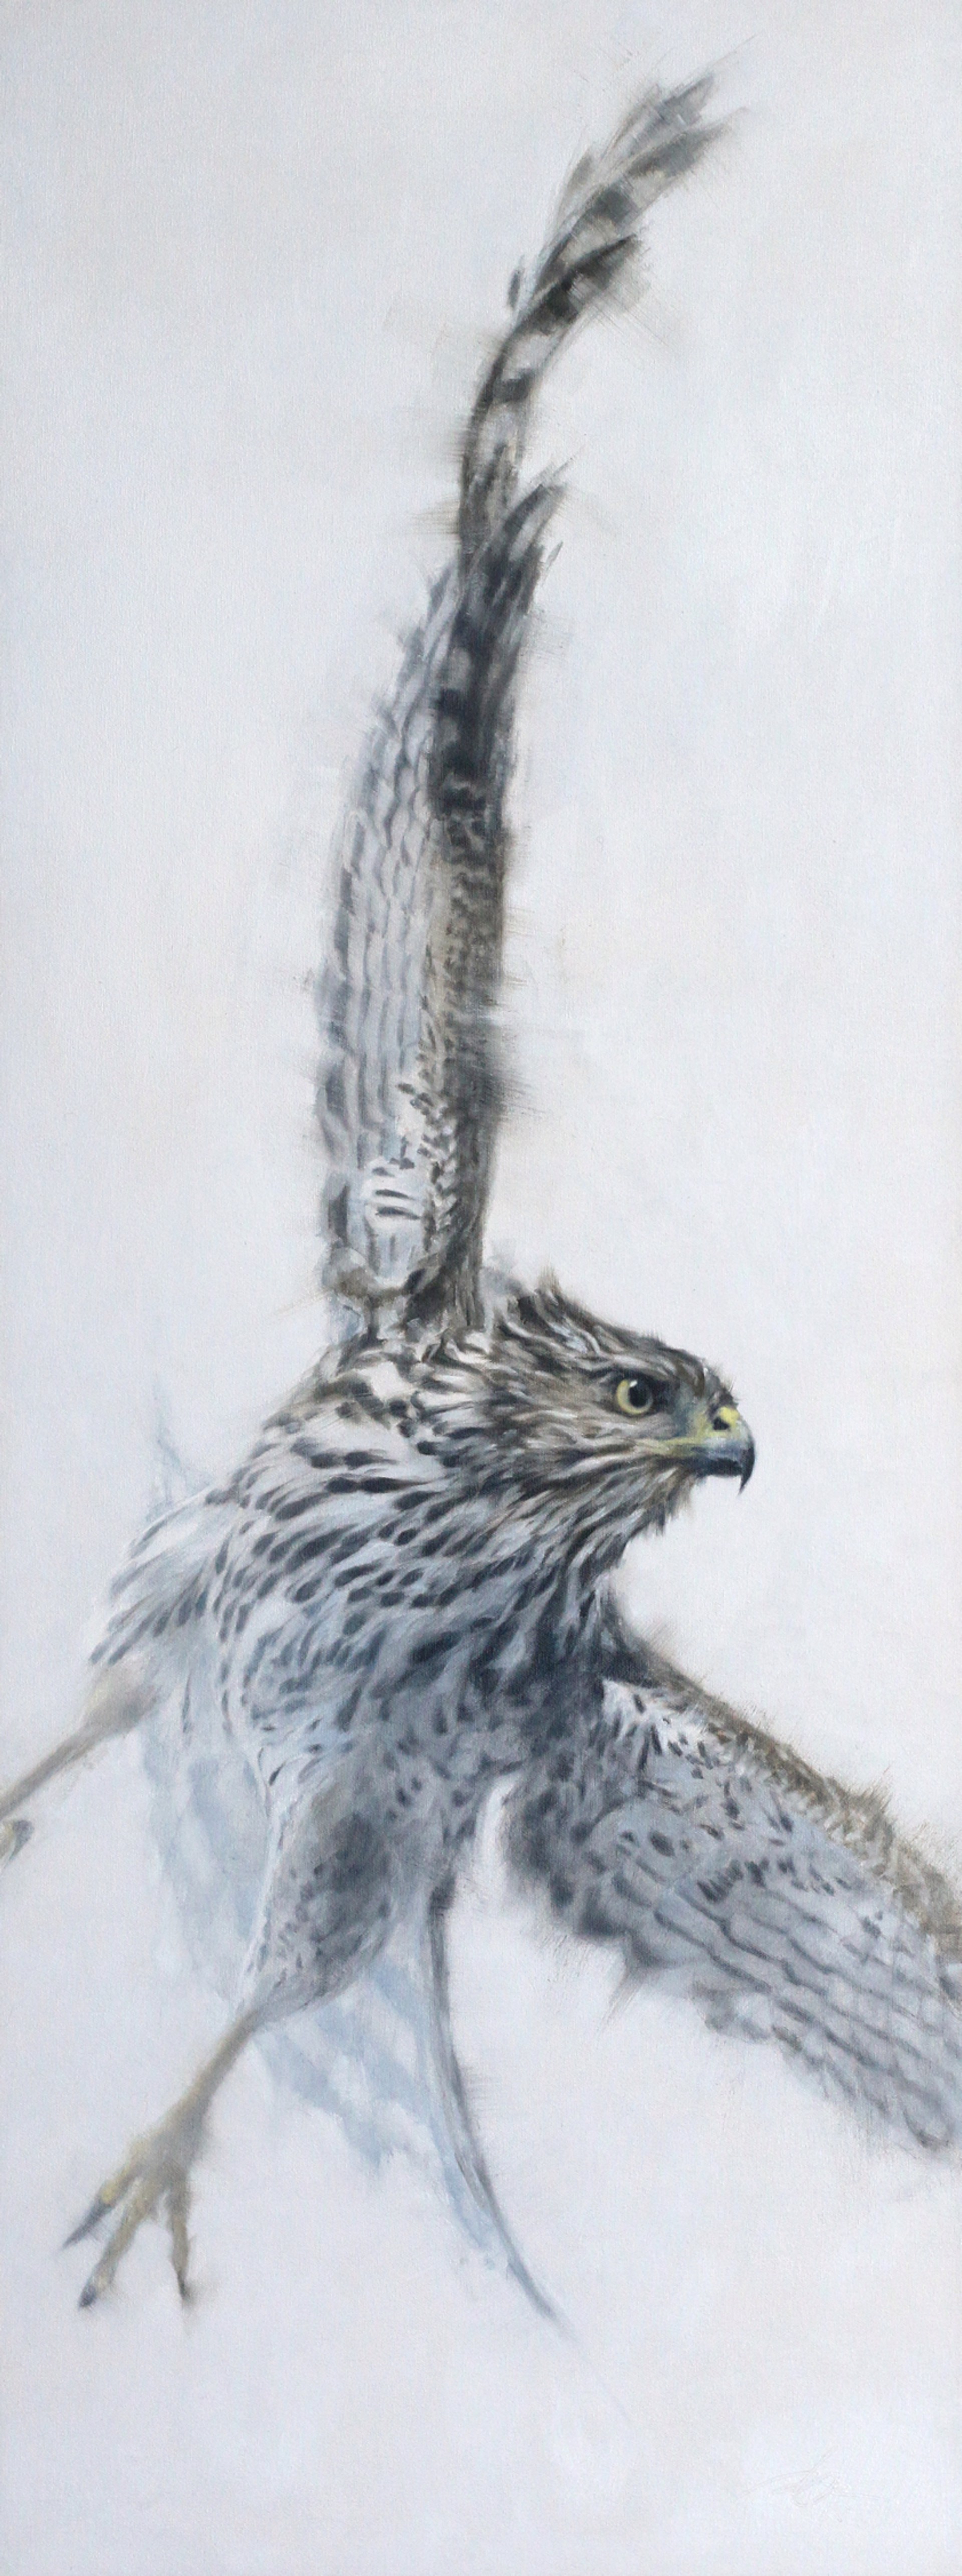 Original Oil Painting Featuring A Cooper's Hawk With White Snowy Background